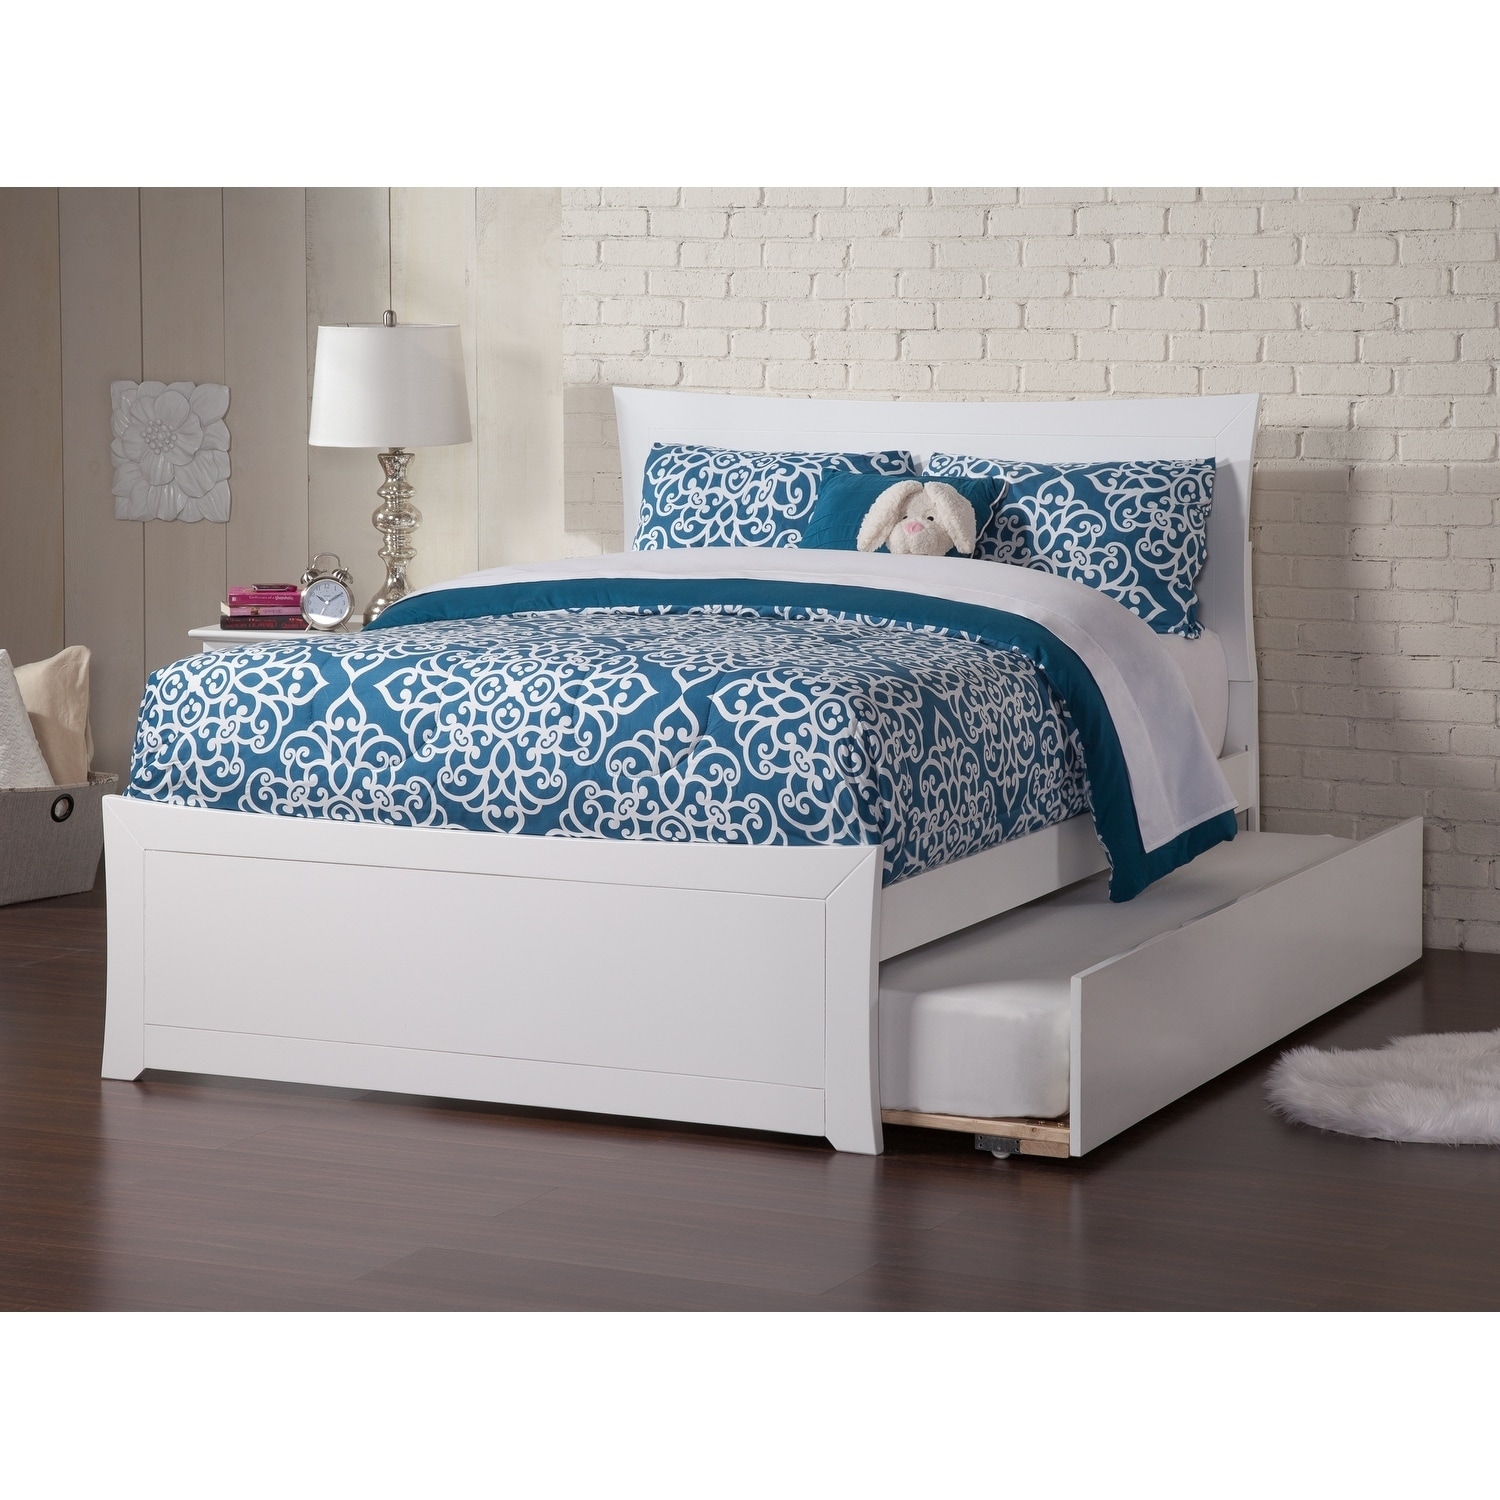 full size trundle bed dimensions